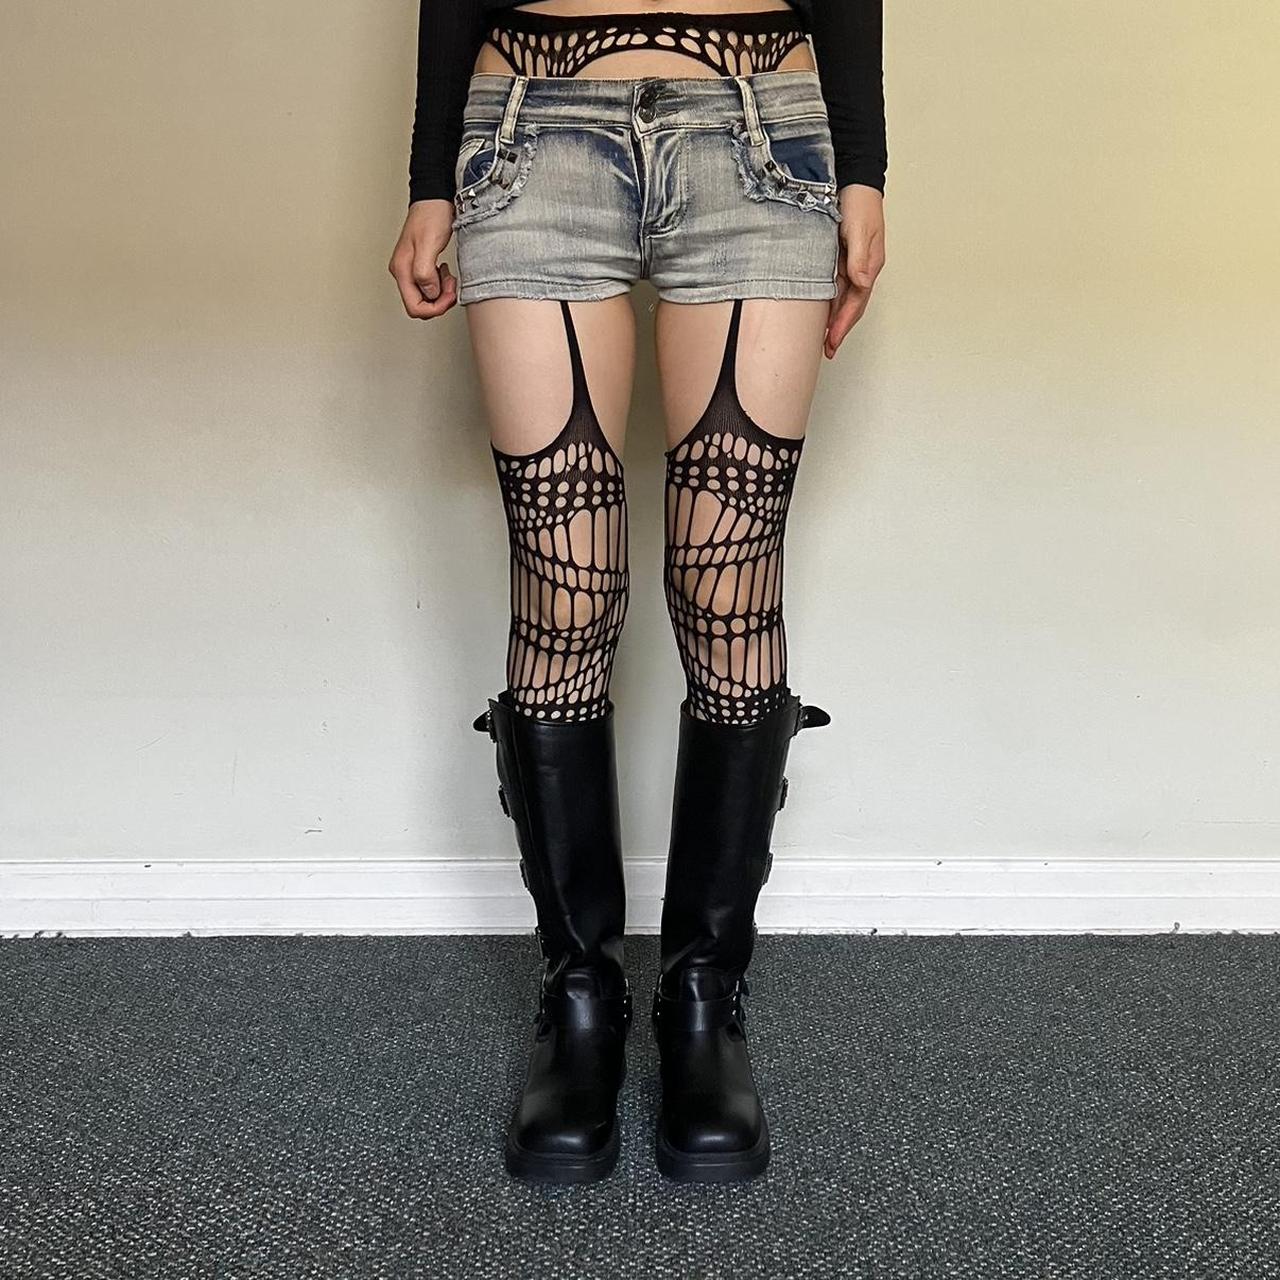 Black Fishnet Stockings * one size, will fit sizes... - Depop